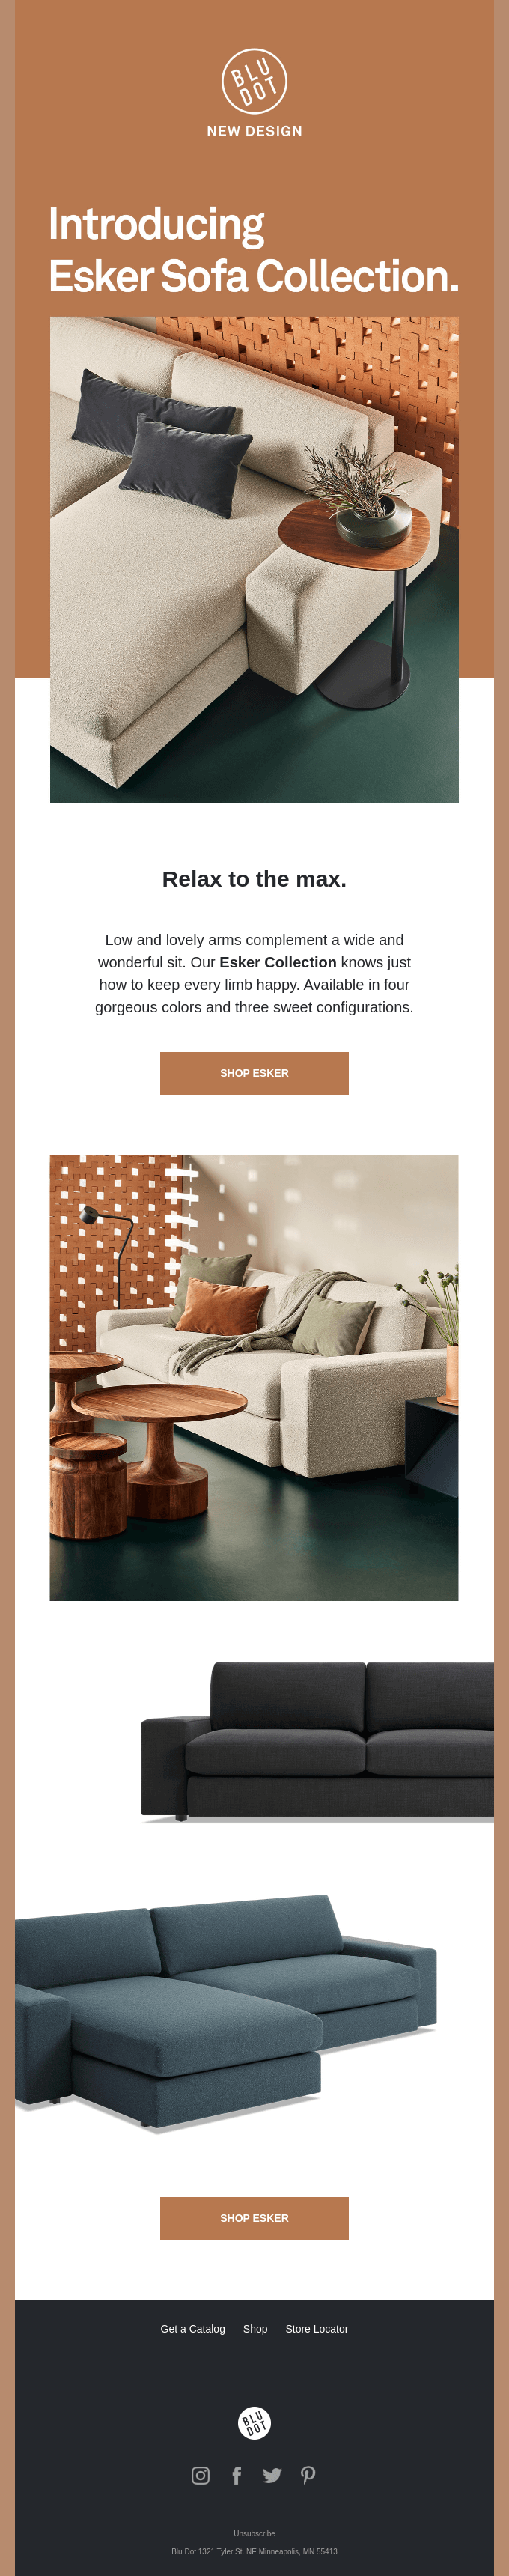 Introducing Esker Sofa Collection.